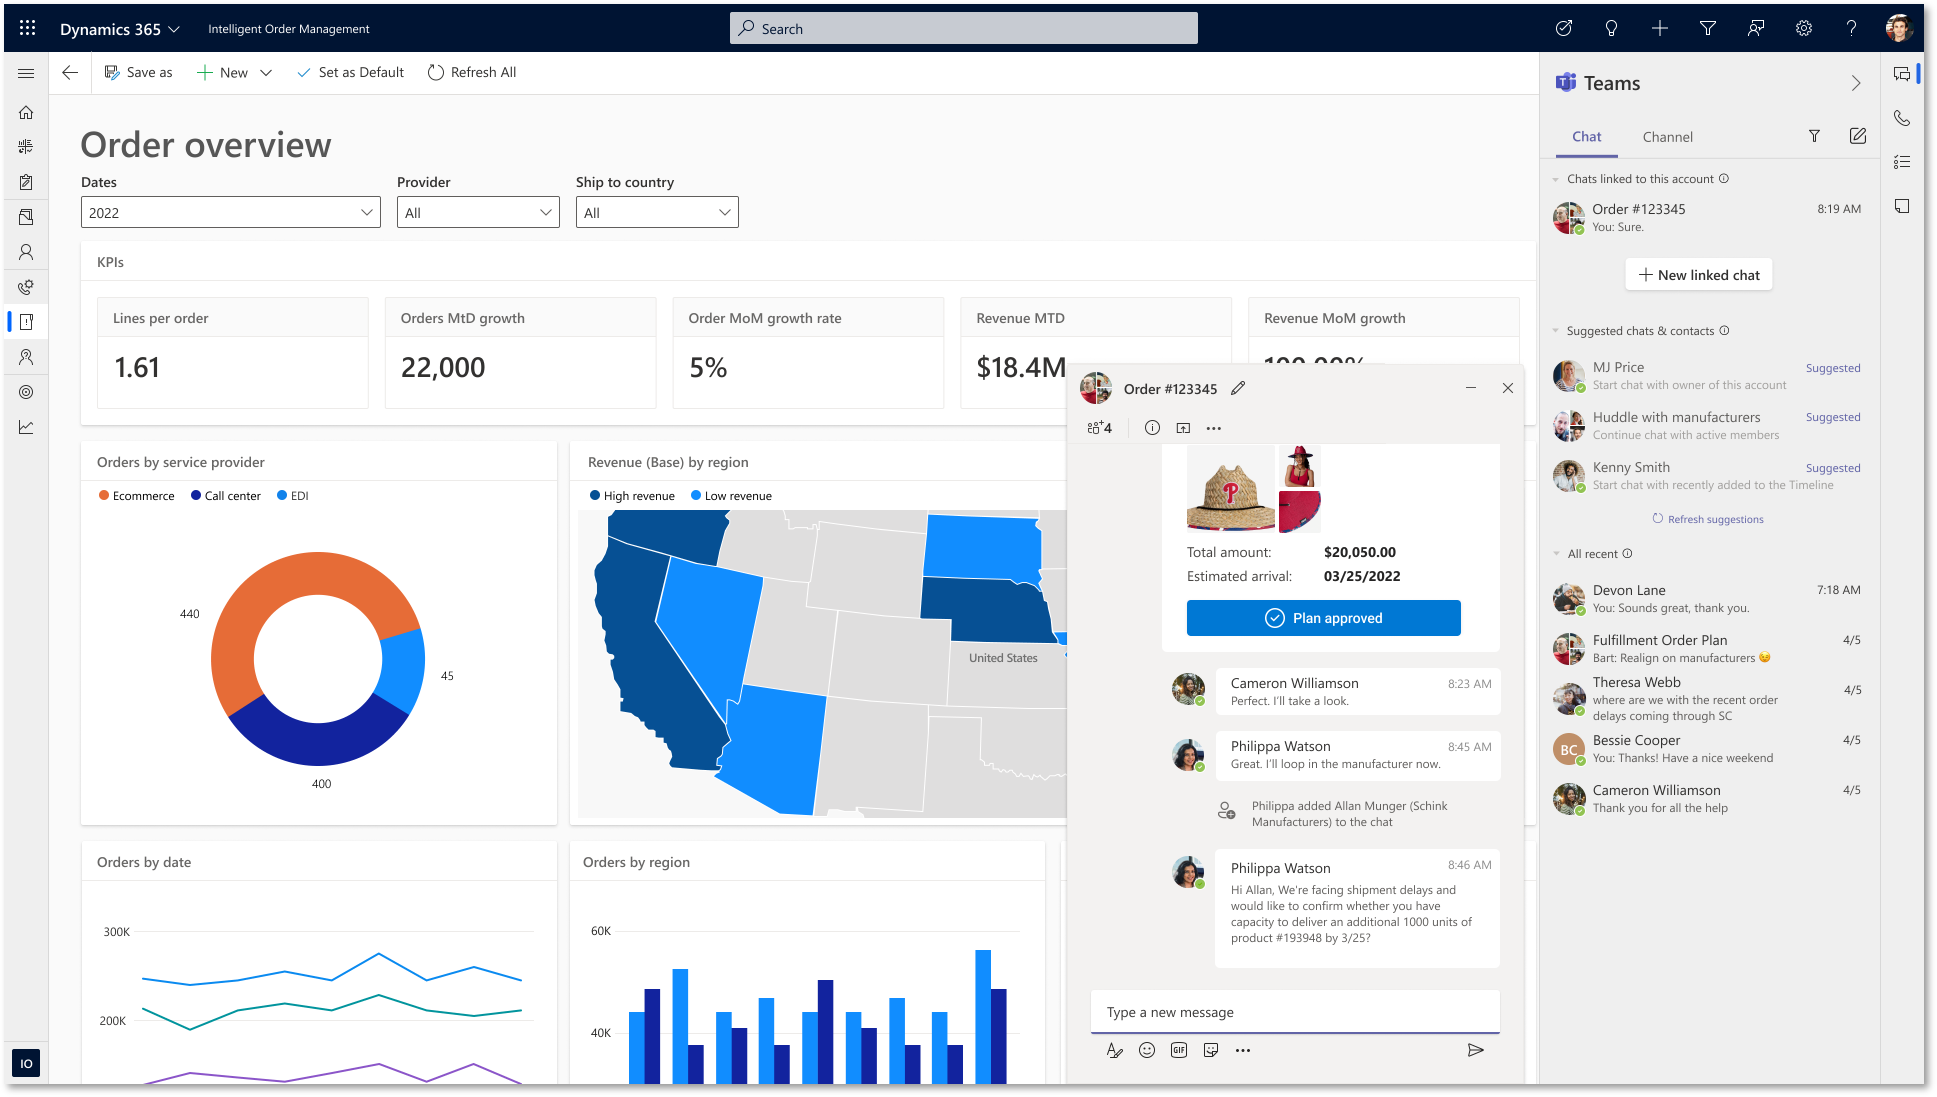 Dynamics 365 Intelligent Order Management with Microsoft Teams